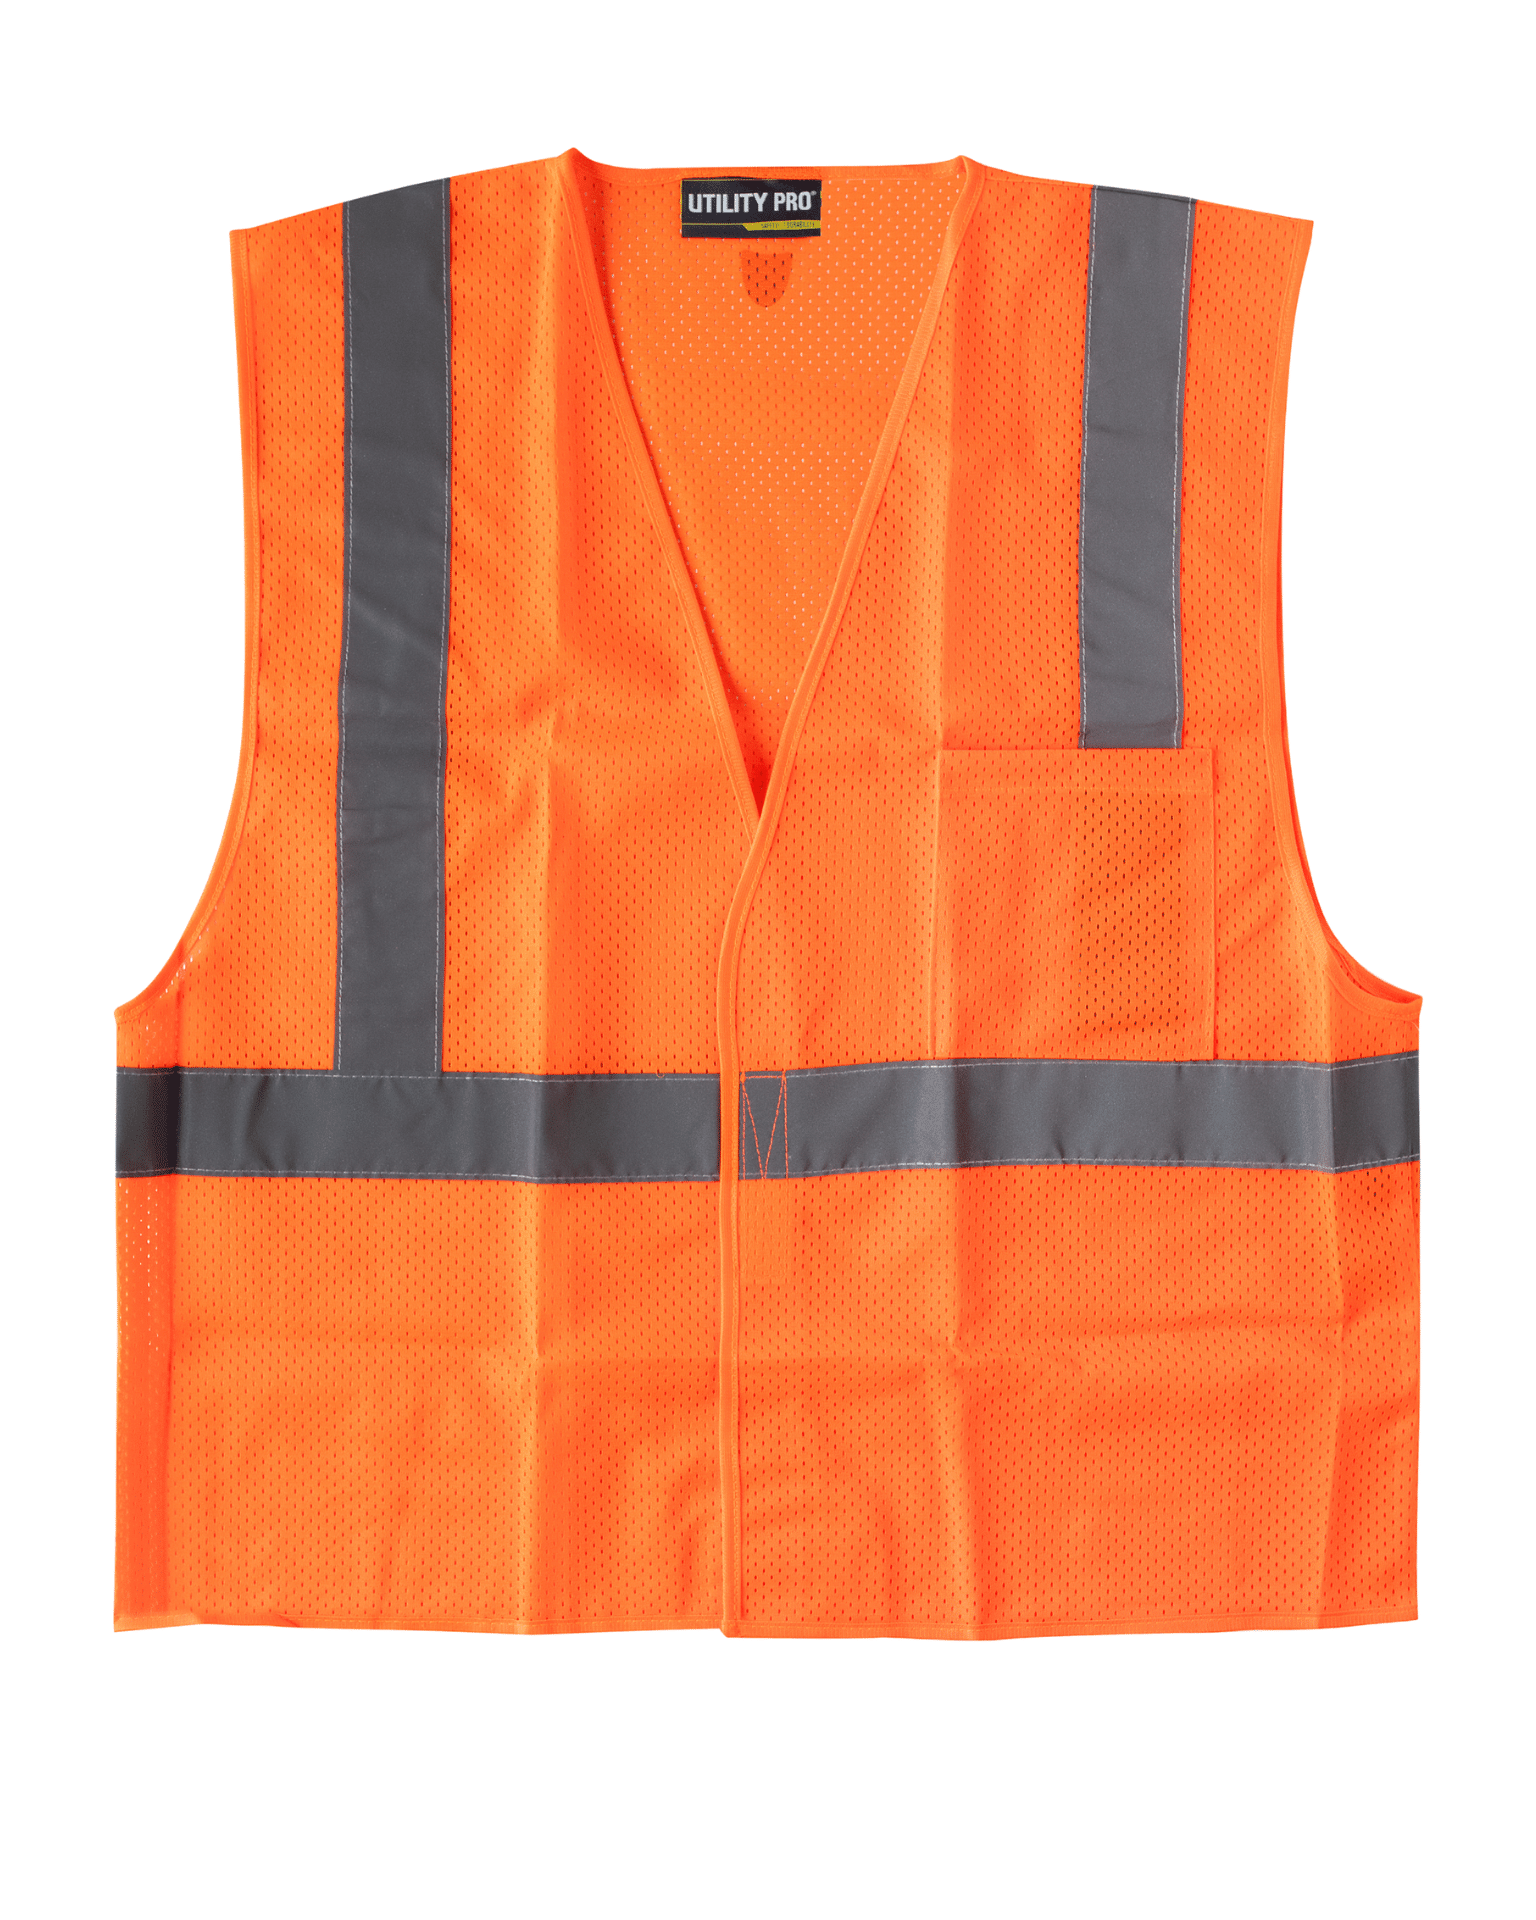 UPA472 High Visibility Mesh Vests - Utility Pro Wear